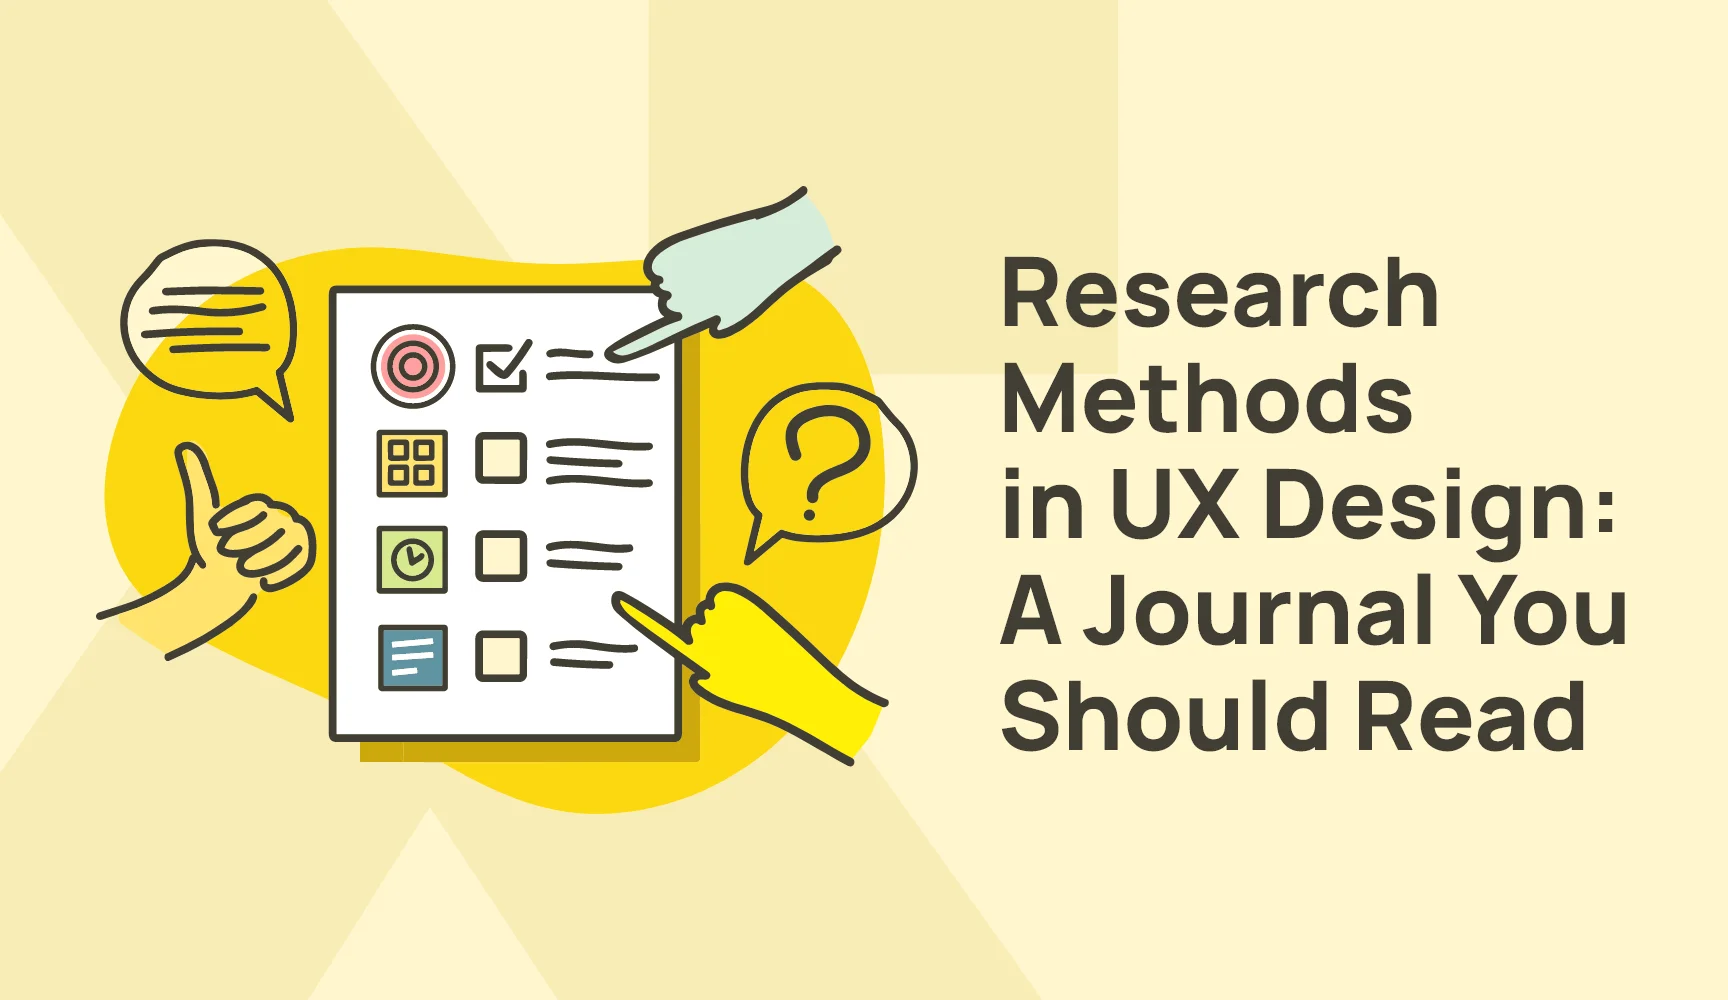 Research Methods in UX Design: A Journal You Should Read